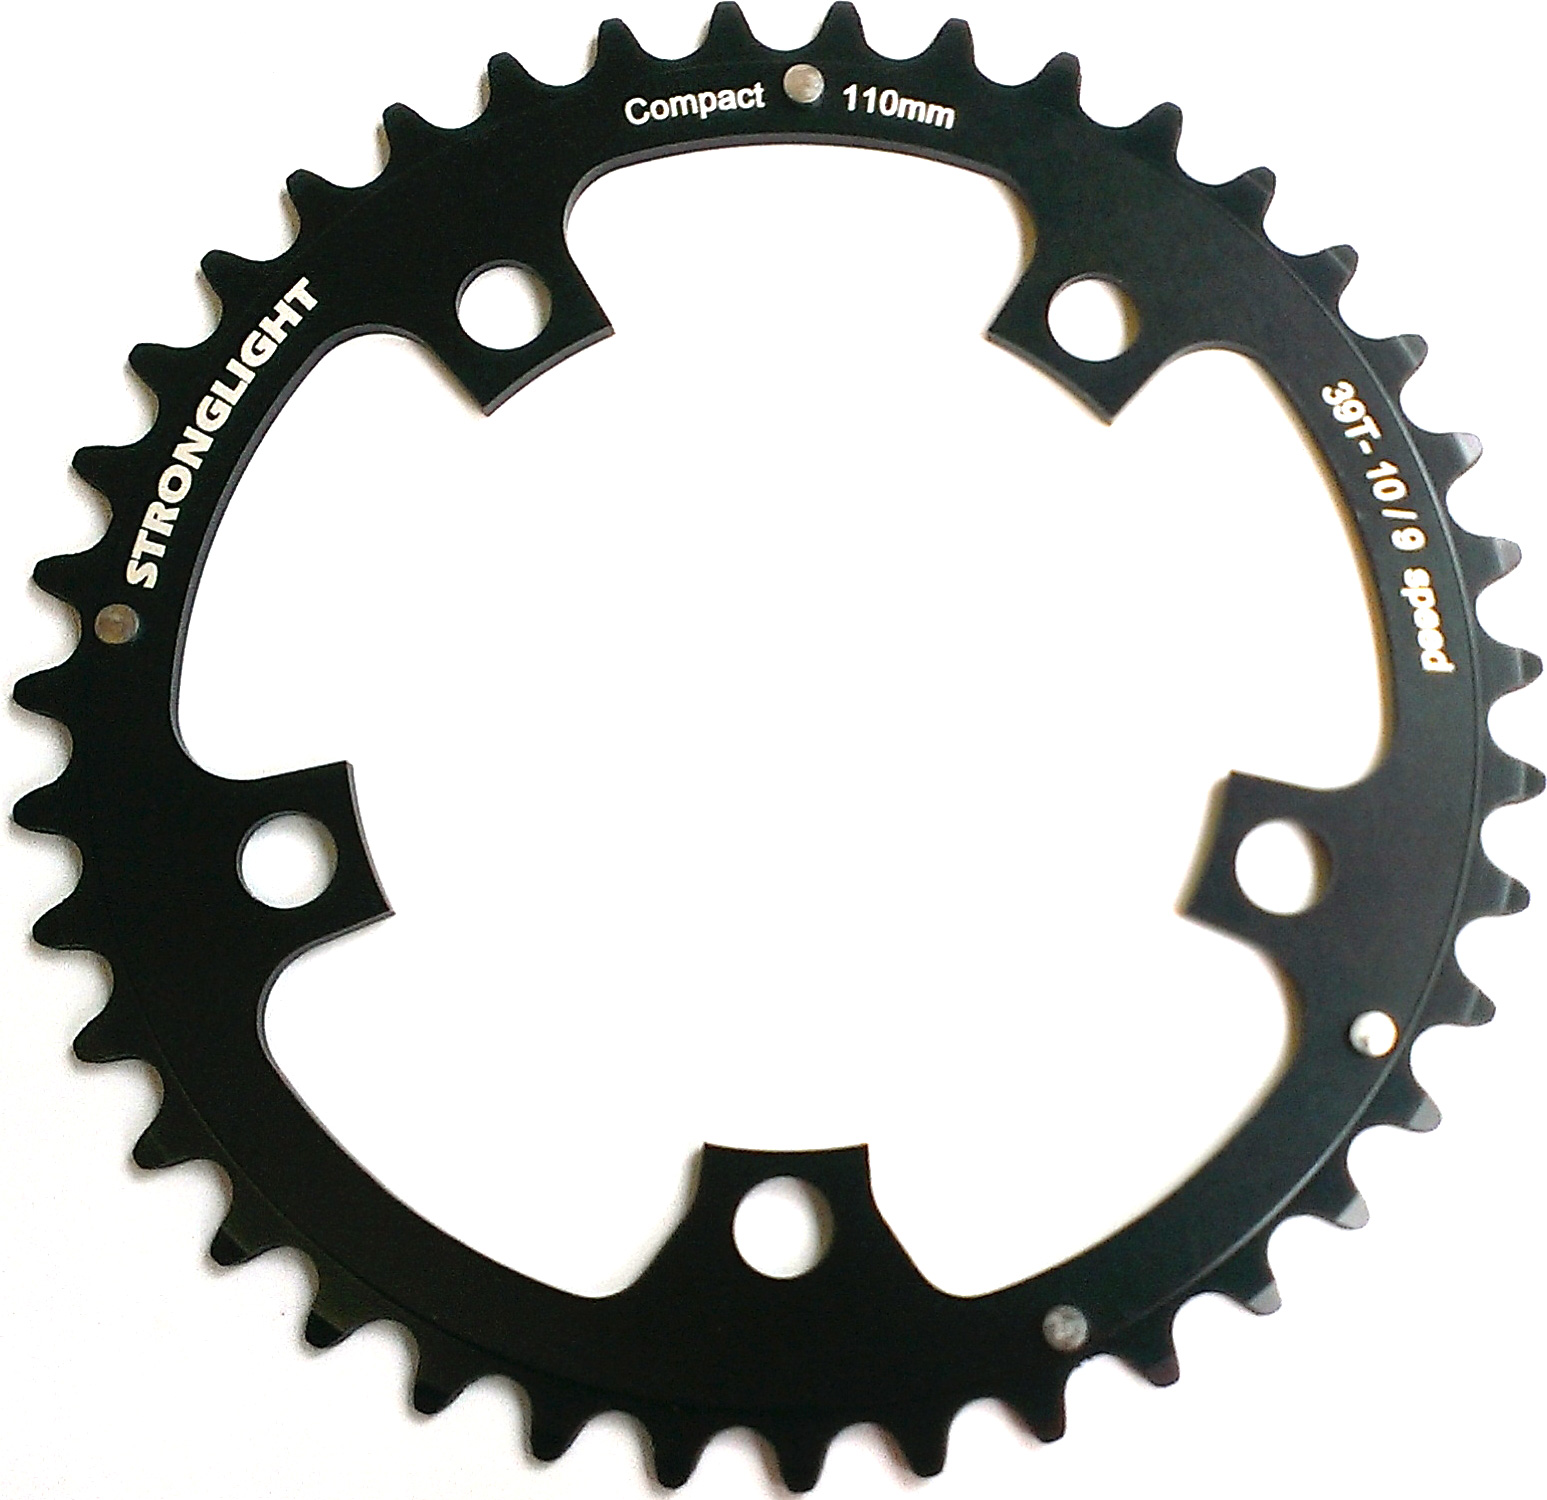 RD11044Z Stronglight 44T Black 5-Arm/110mm Chainring